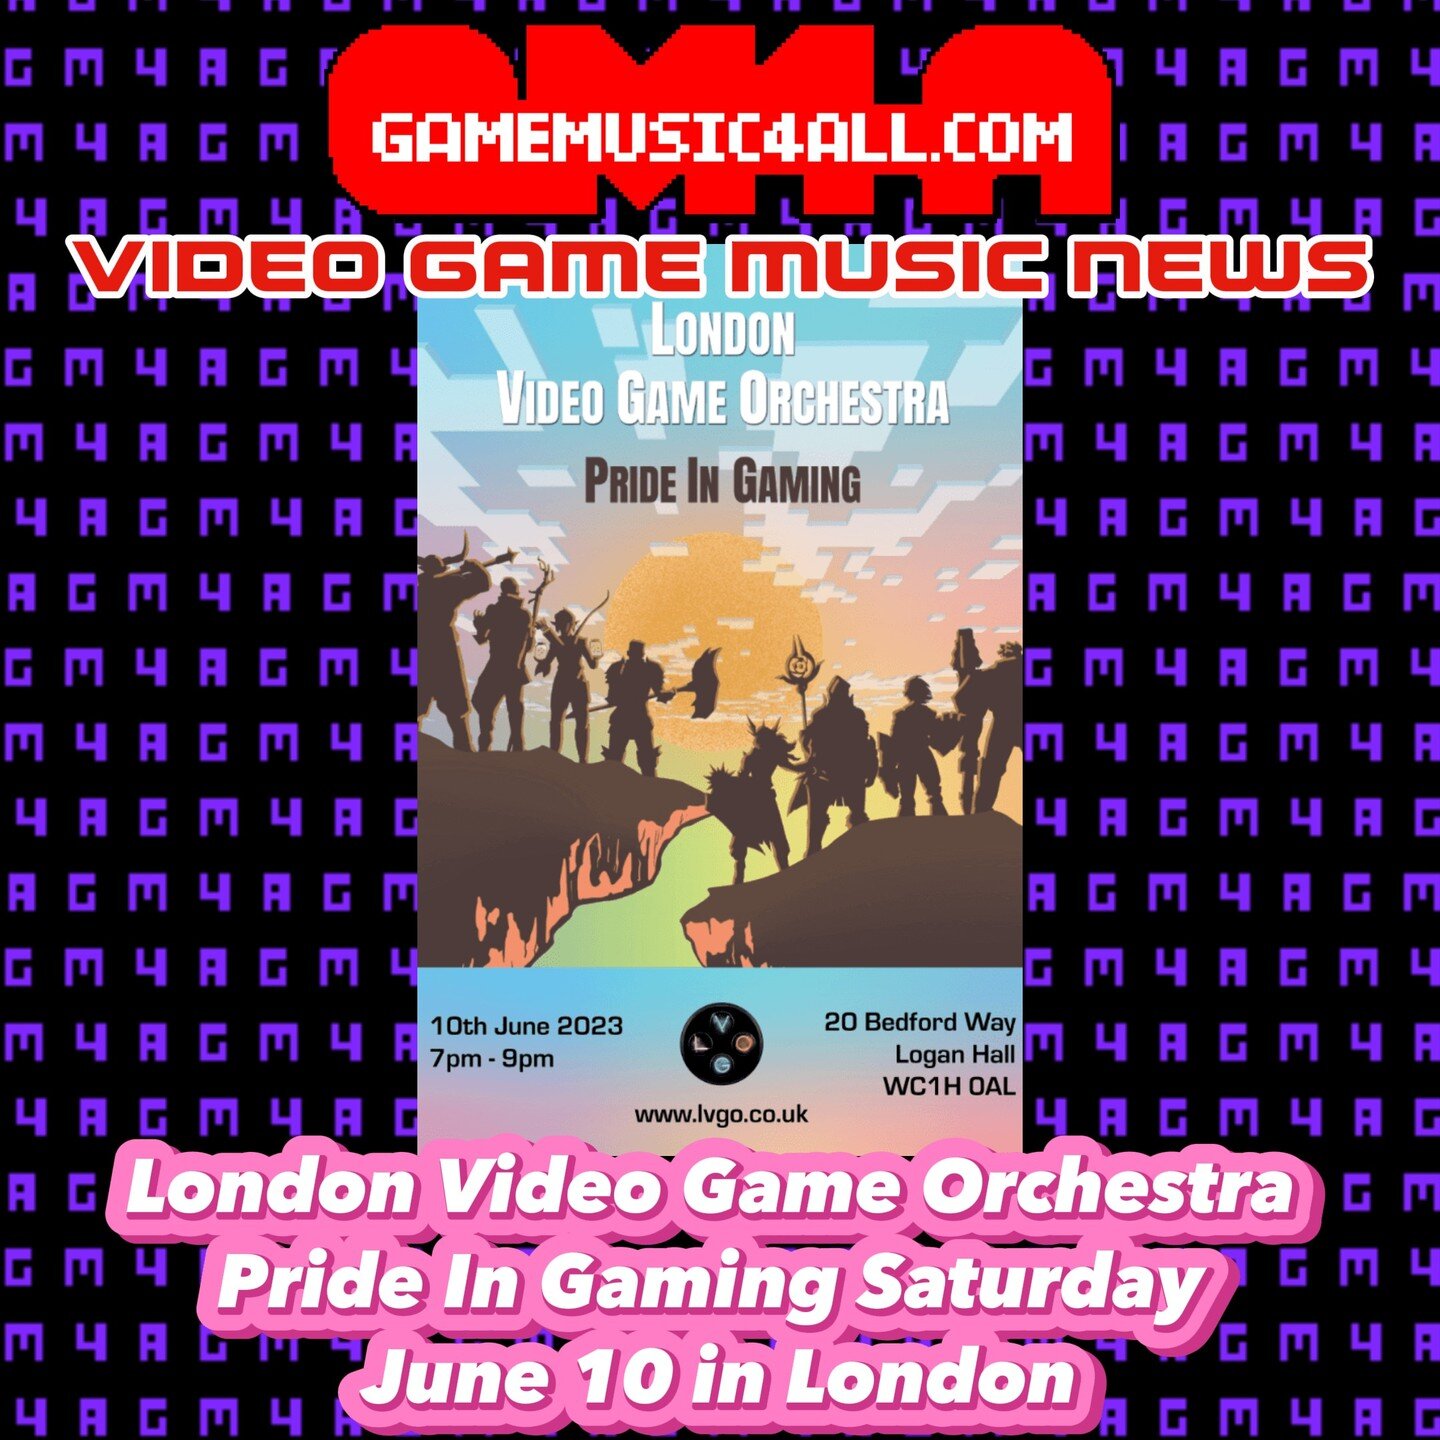 Video Game Music Event! &quot;London Video Game Orchestra Pride In Gaming Sat June 10 in London, England&quot; @lvgorchestra 
Find more info and gaming news at: https://gamemusic4all.com/vgmnews

#orchestra #symphony #music #newmusic #musicevent #eve